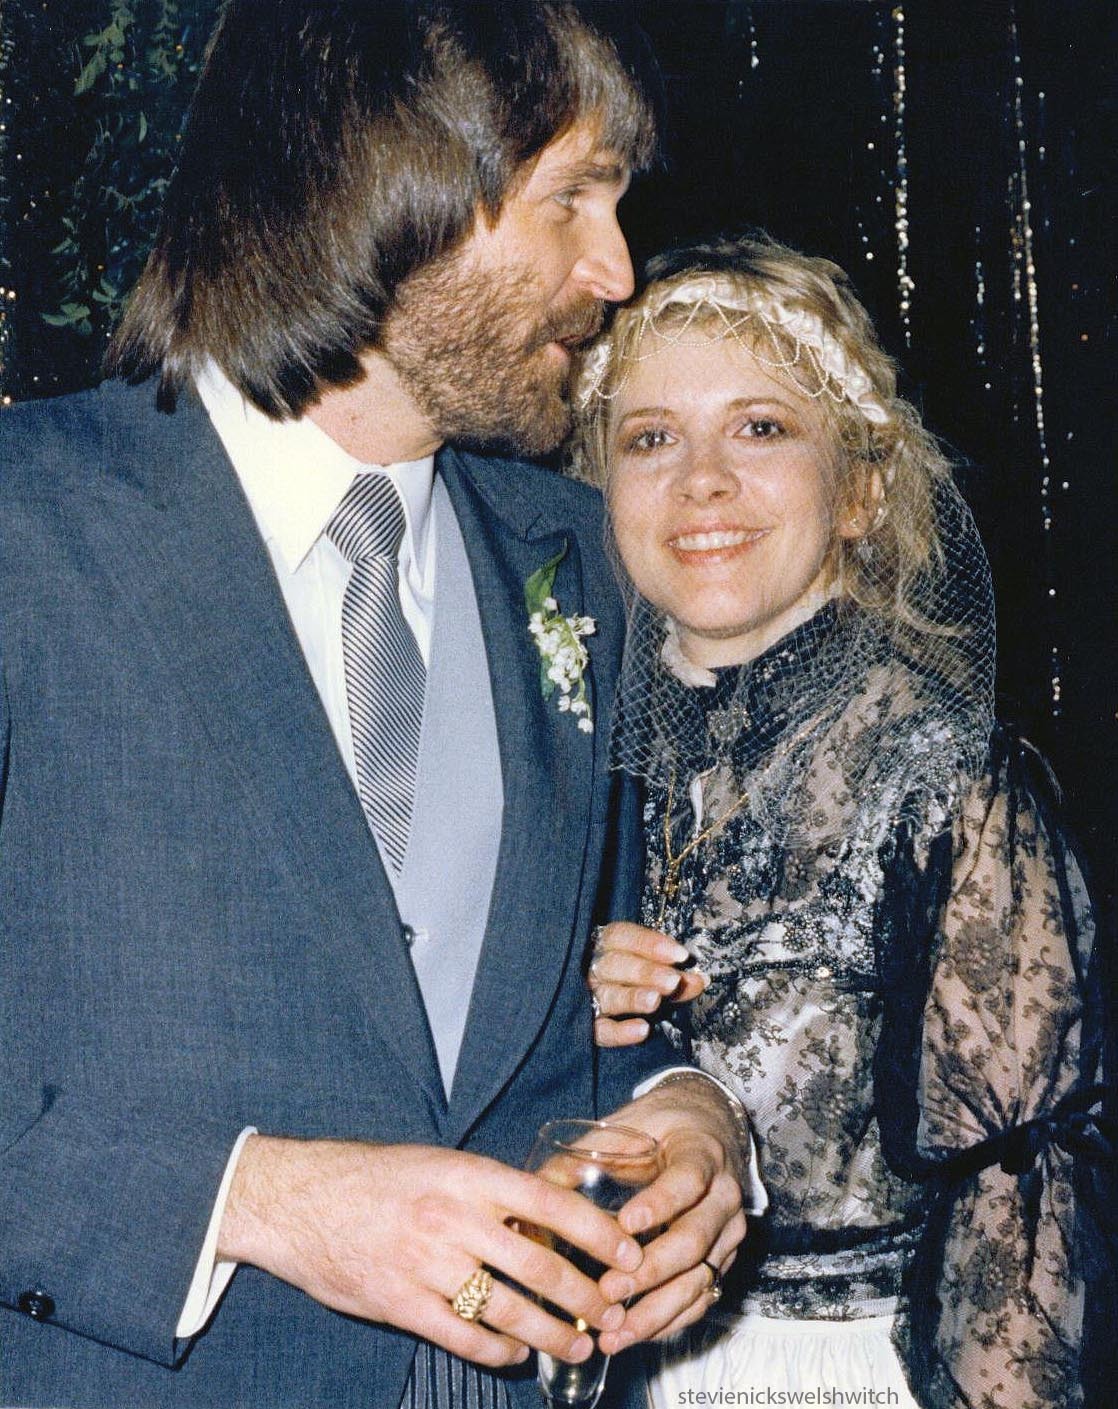 36 years ago today, Stevie married Kim Anderson.